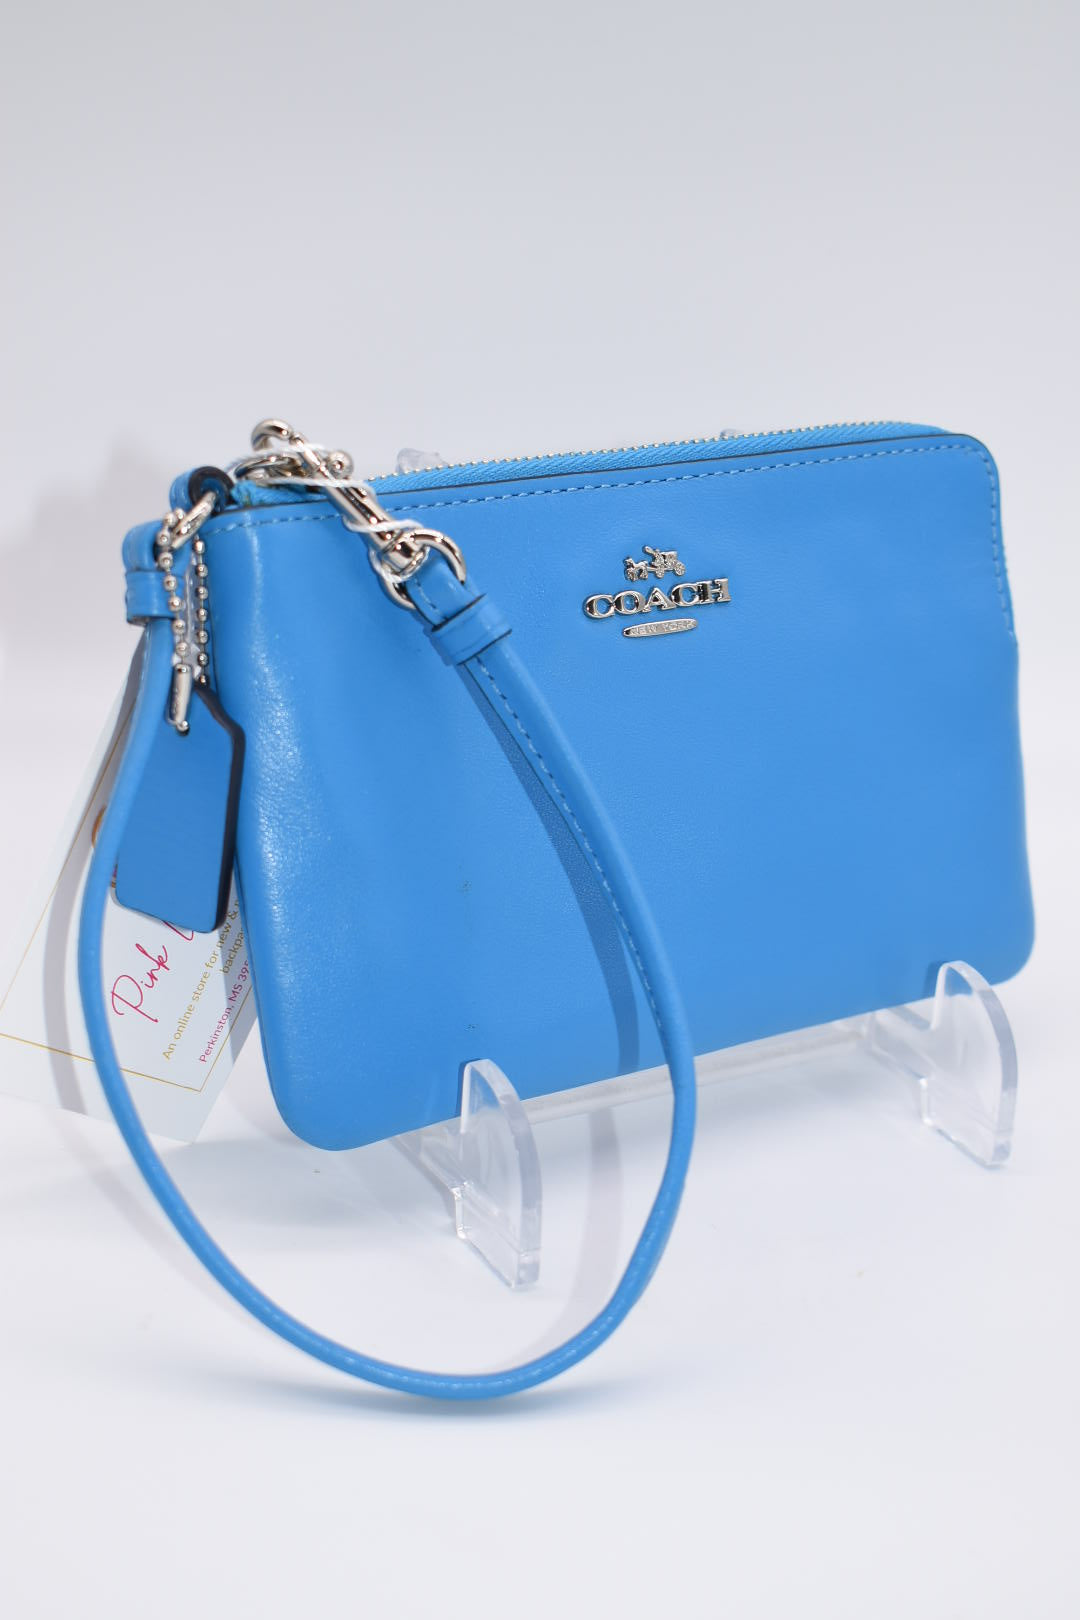 Coach Small Blue Leather Wristlet